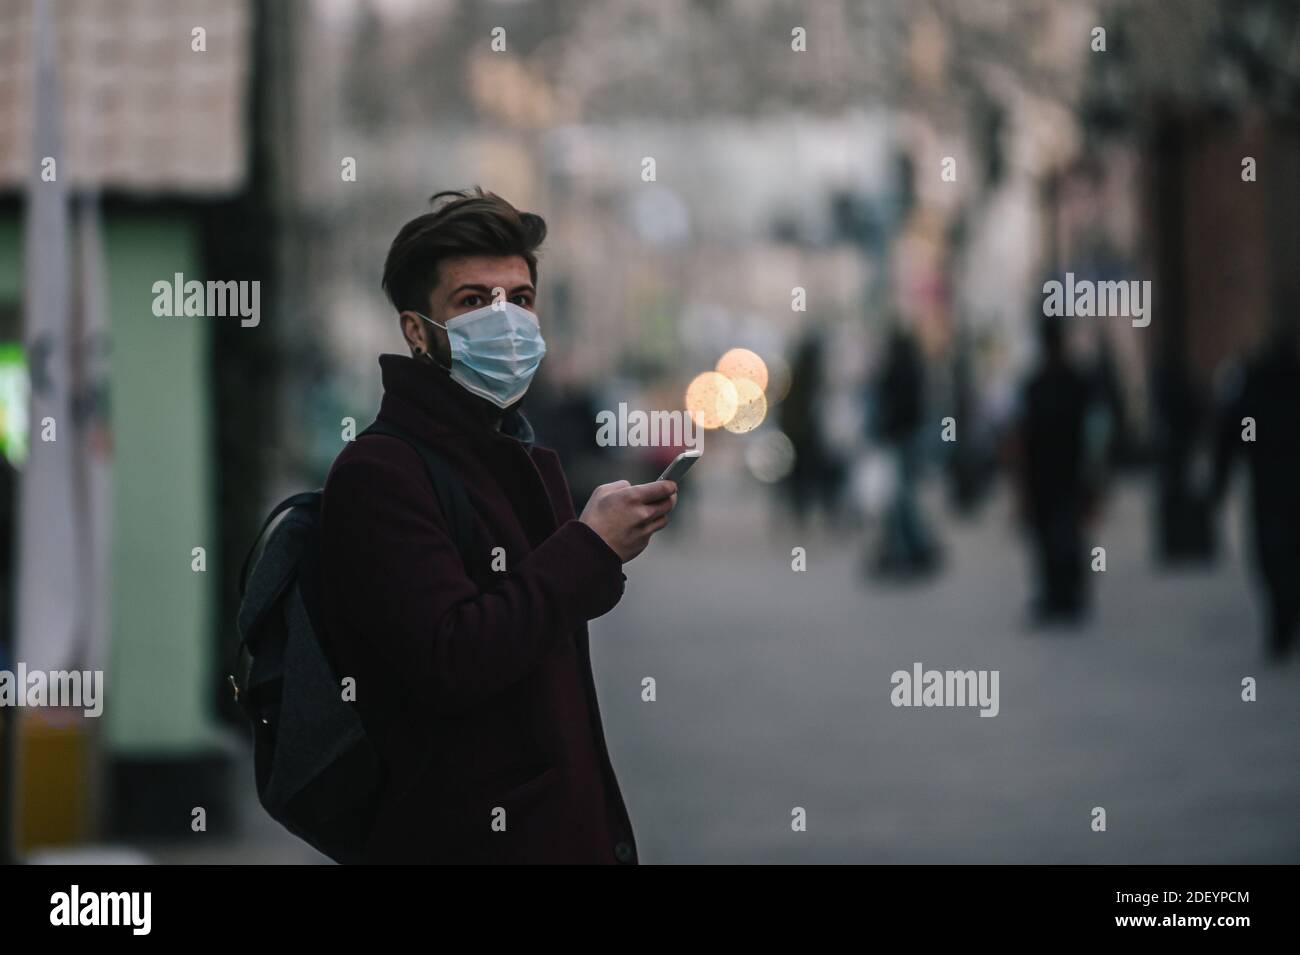 (201202) -- MOSCOW, Dec. 2, 2020 (Xinhua) -- A man wearing a protective mask walks on the street in Moscow, Russia, on Dec. 2, 2020. Russia recorded 25,345 more COVID-19 infections over the past 24 hours, bringing the national tally to 2,347,401, the country's COVID-19 response center said Wednesday. (Xinhua/Evgeny Sinitsyn) Stock Photo